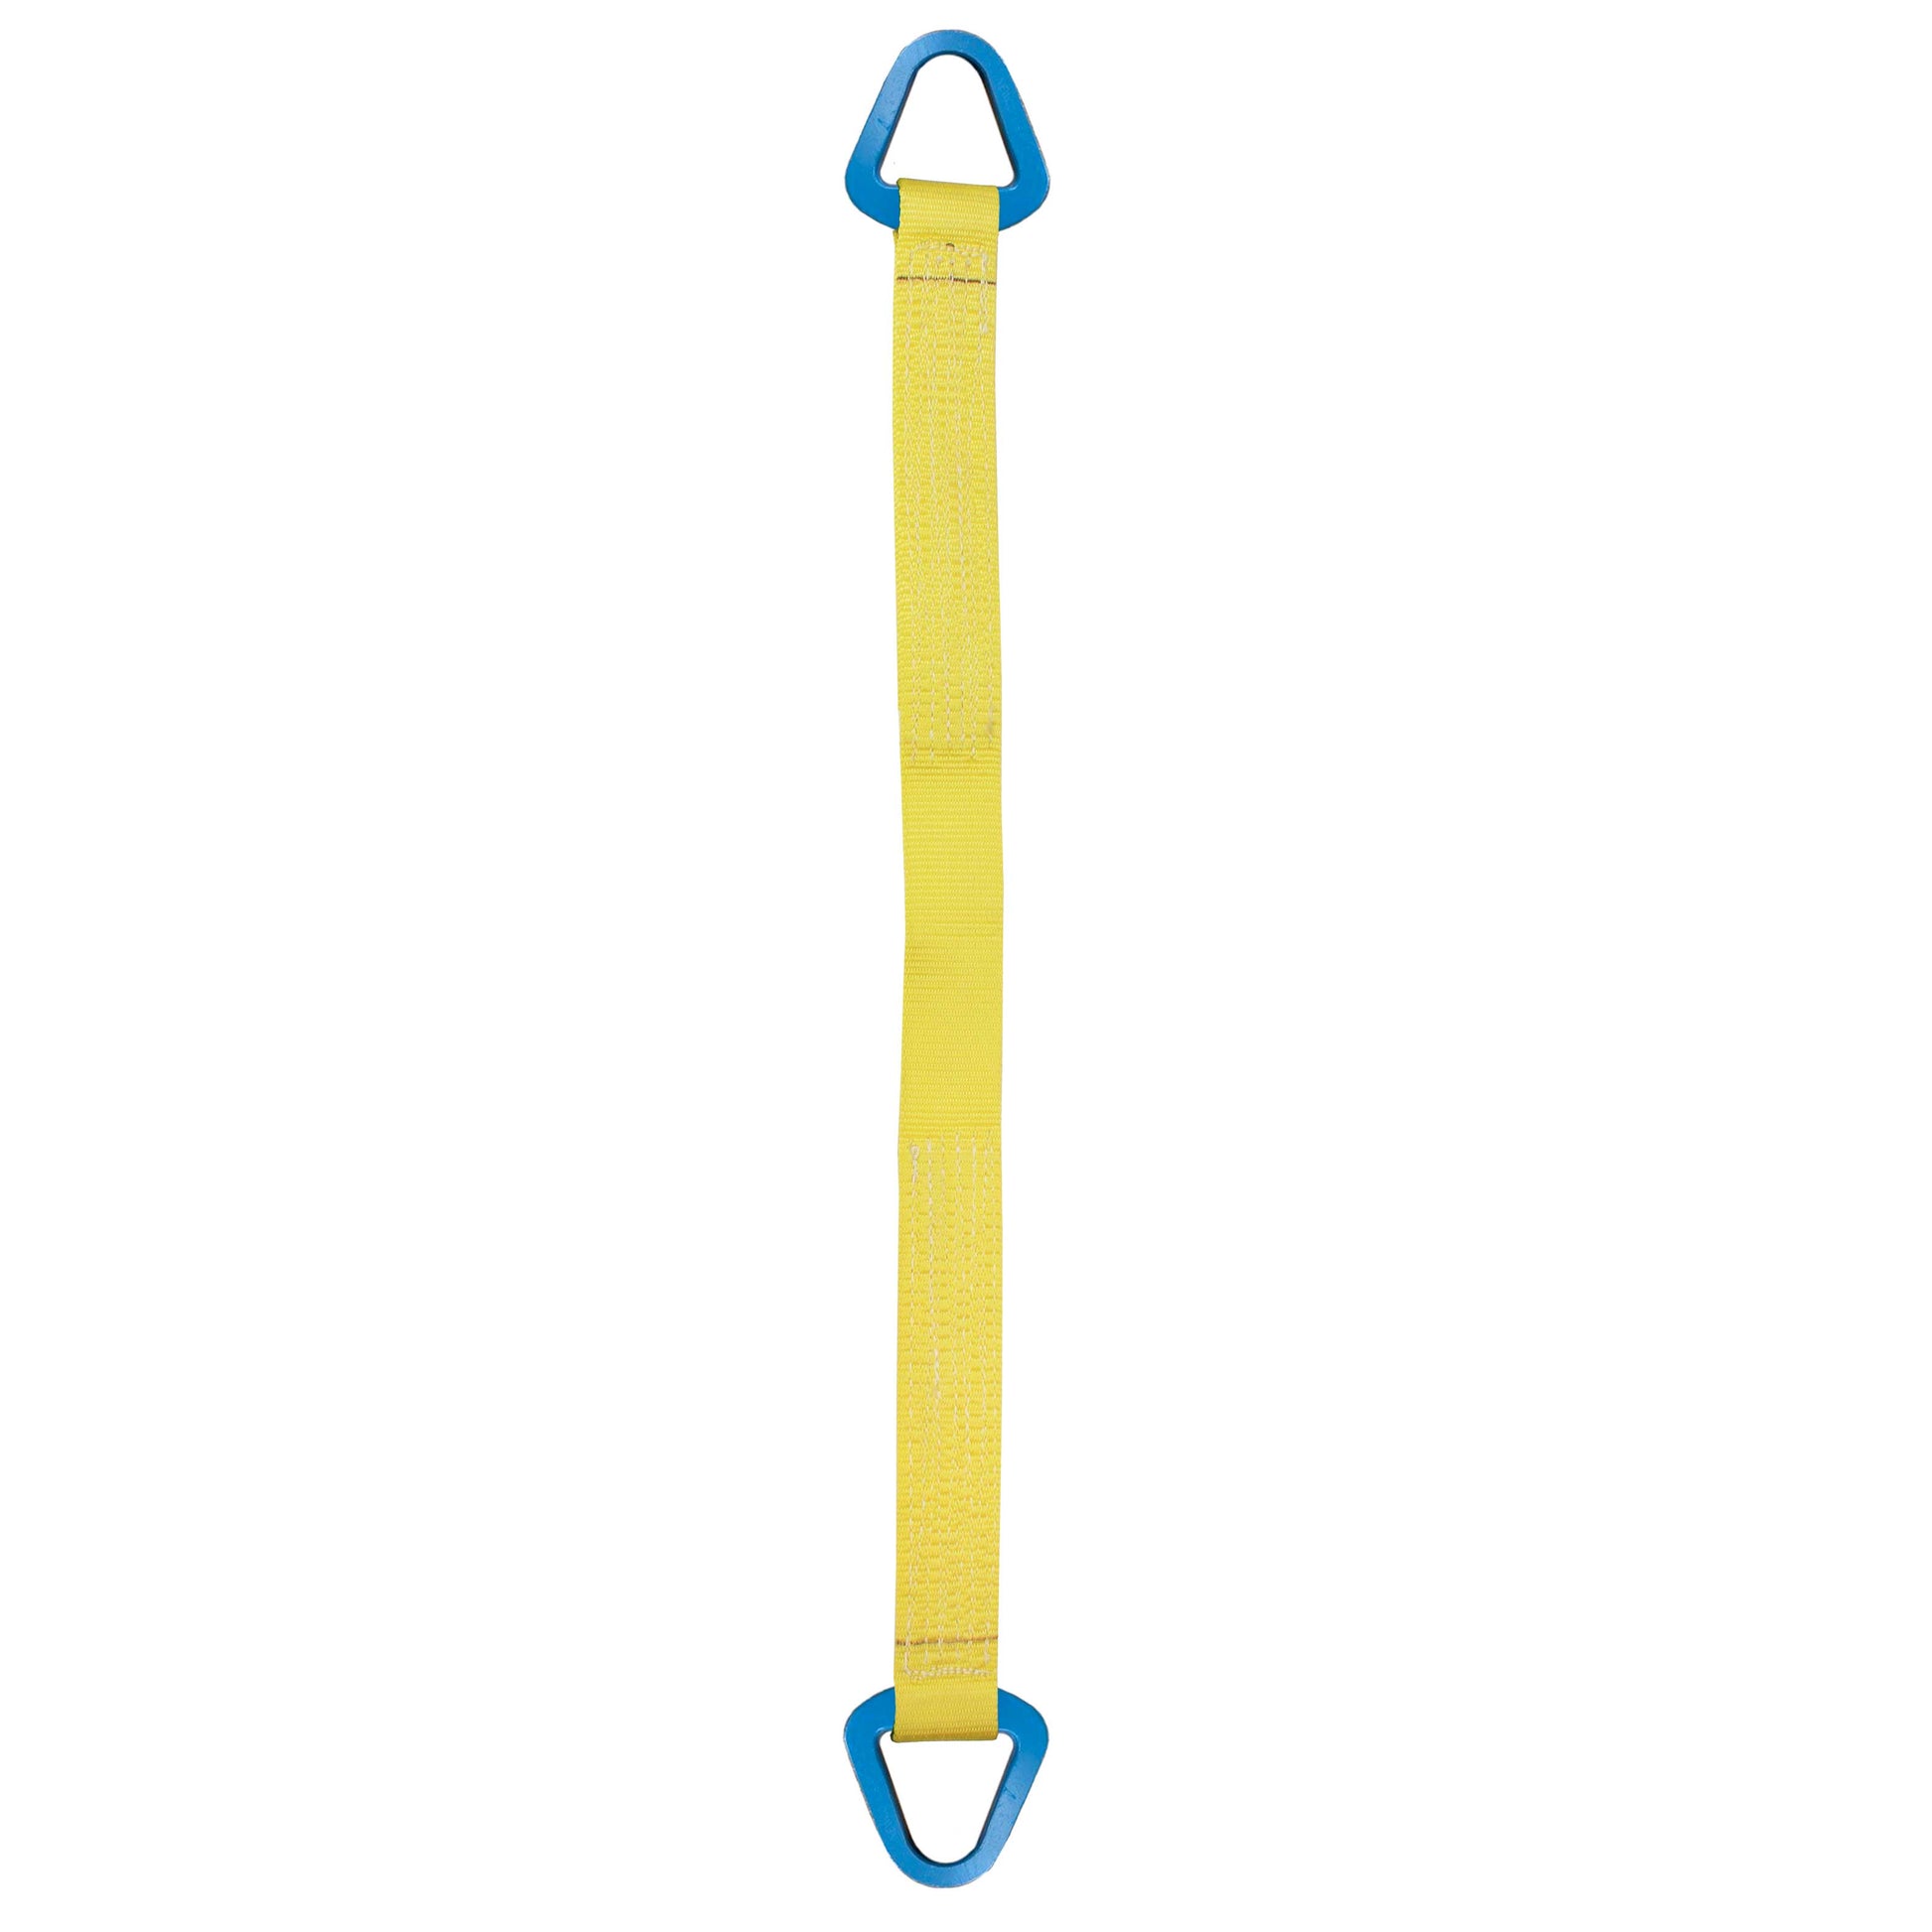 Nylon Lifting Sling Triangle 10 inch x 8 foot 1ply image 1 of 2